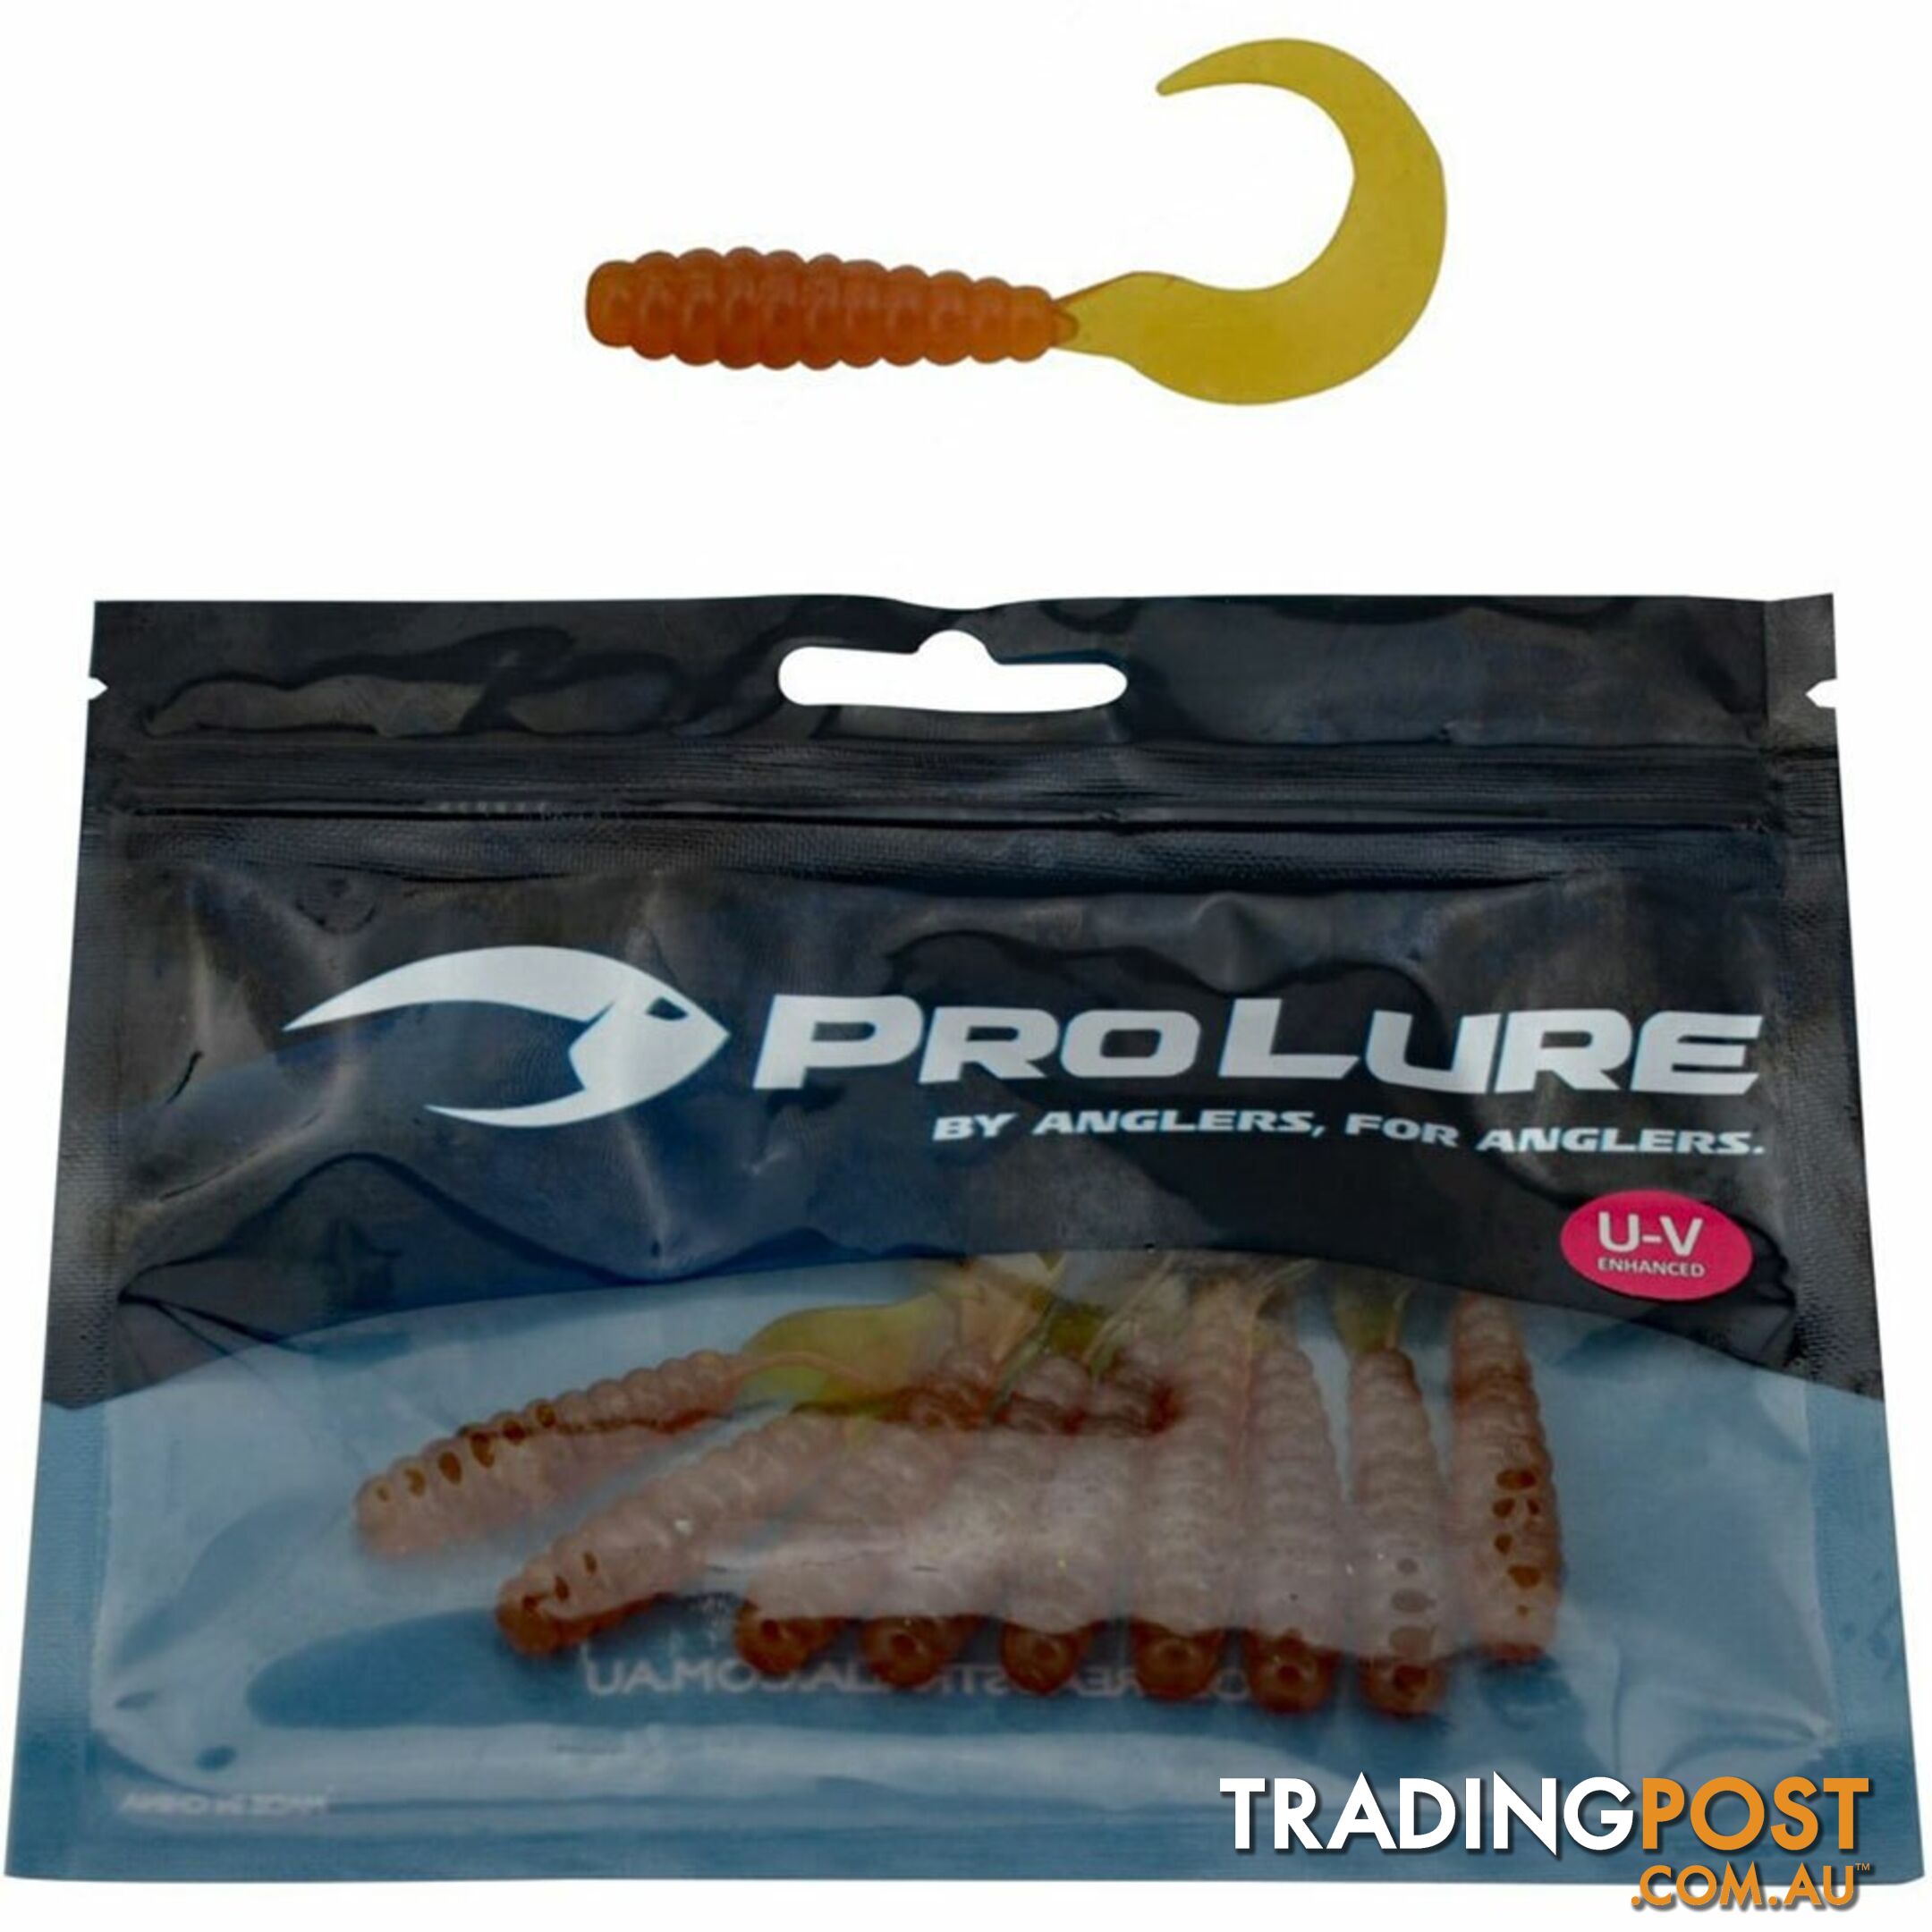 Pro Lure Grub Tail Lures (Packet) - PRO-GT - Pro Lure Australia